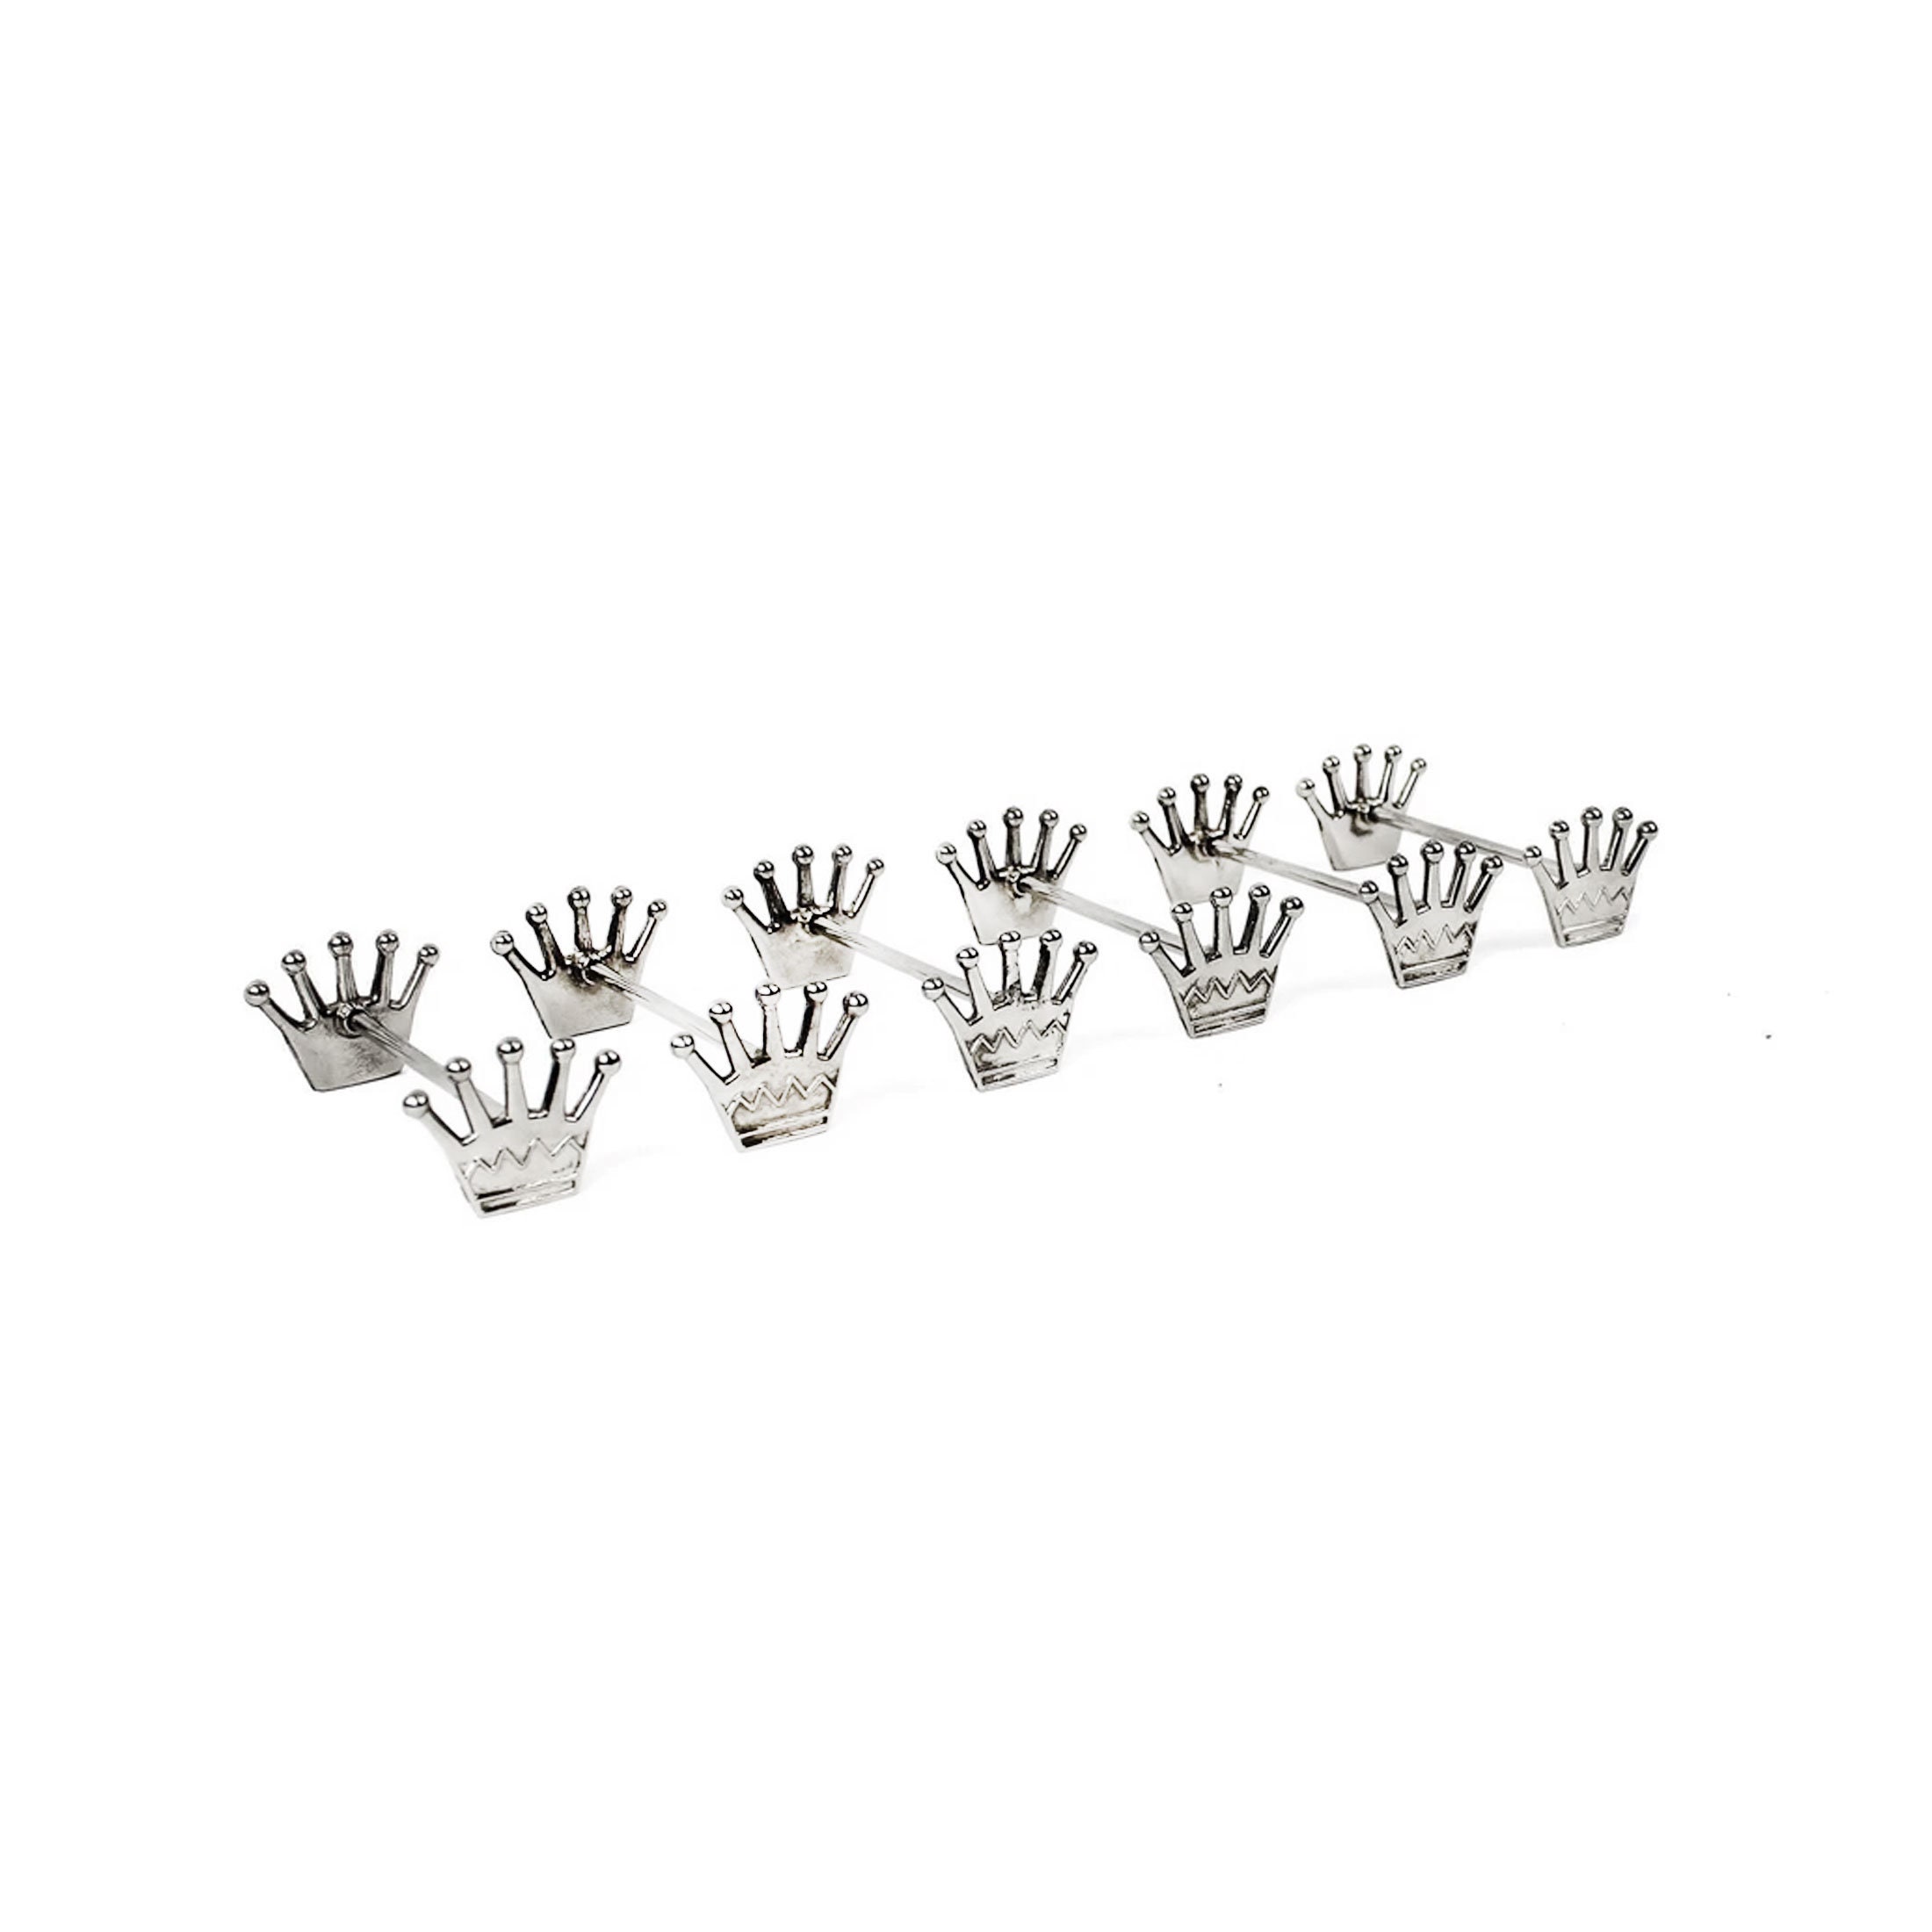 SET OF 6 VEGETABLE KNIFE RESTS – Houses & Parties